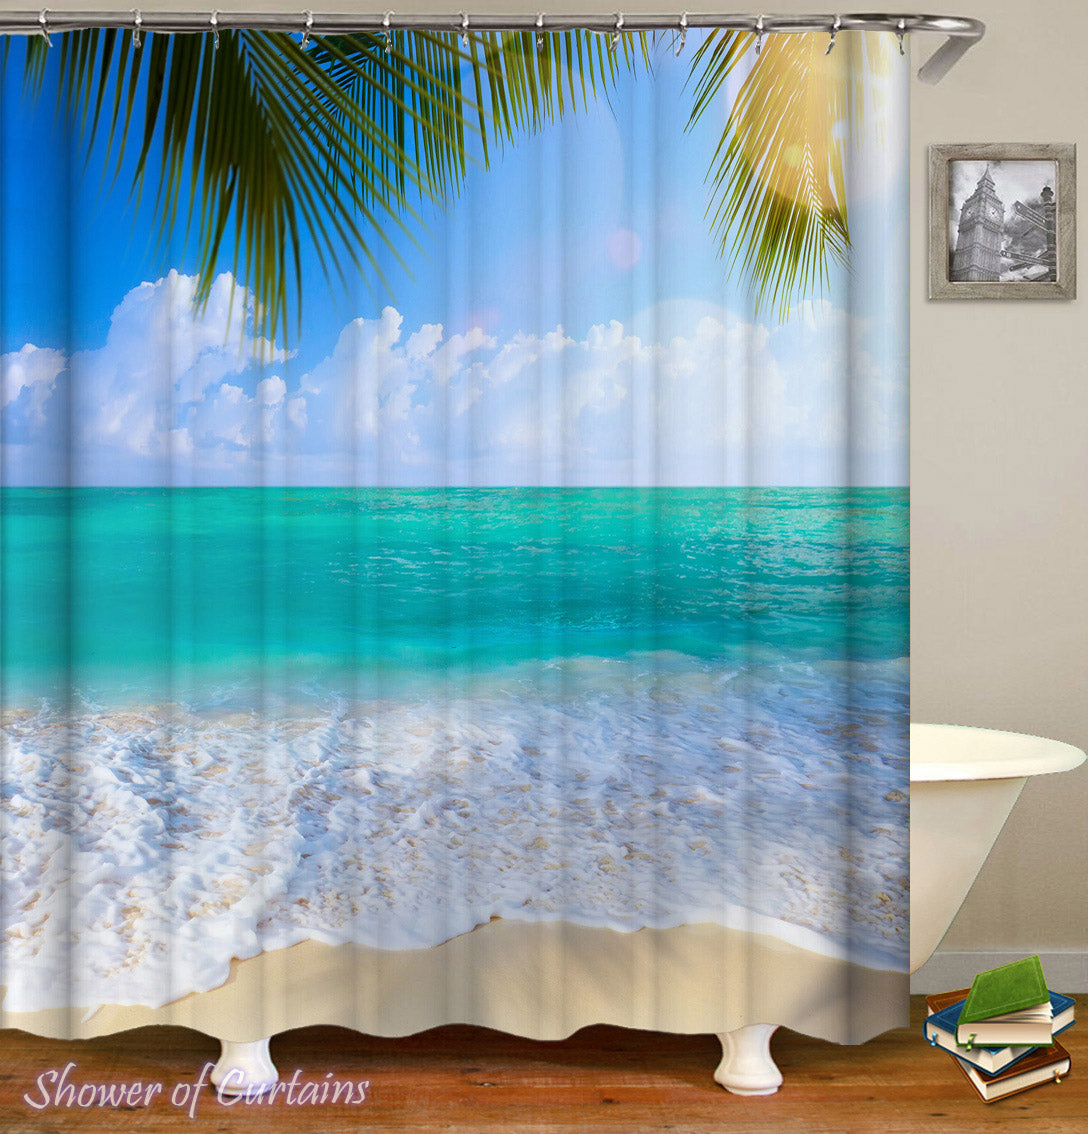 Shower Curtains | Peacefully Turquoise Beach – Shower of Curtains